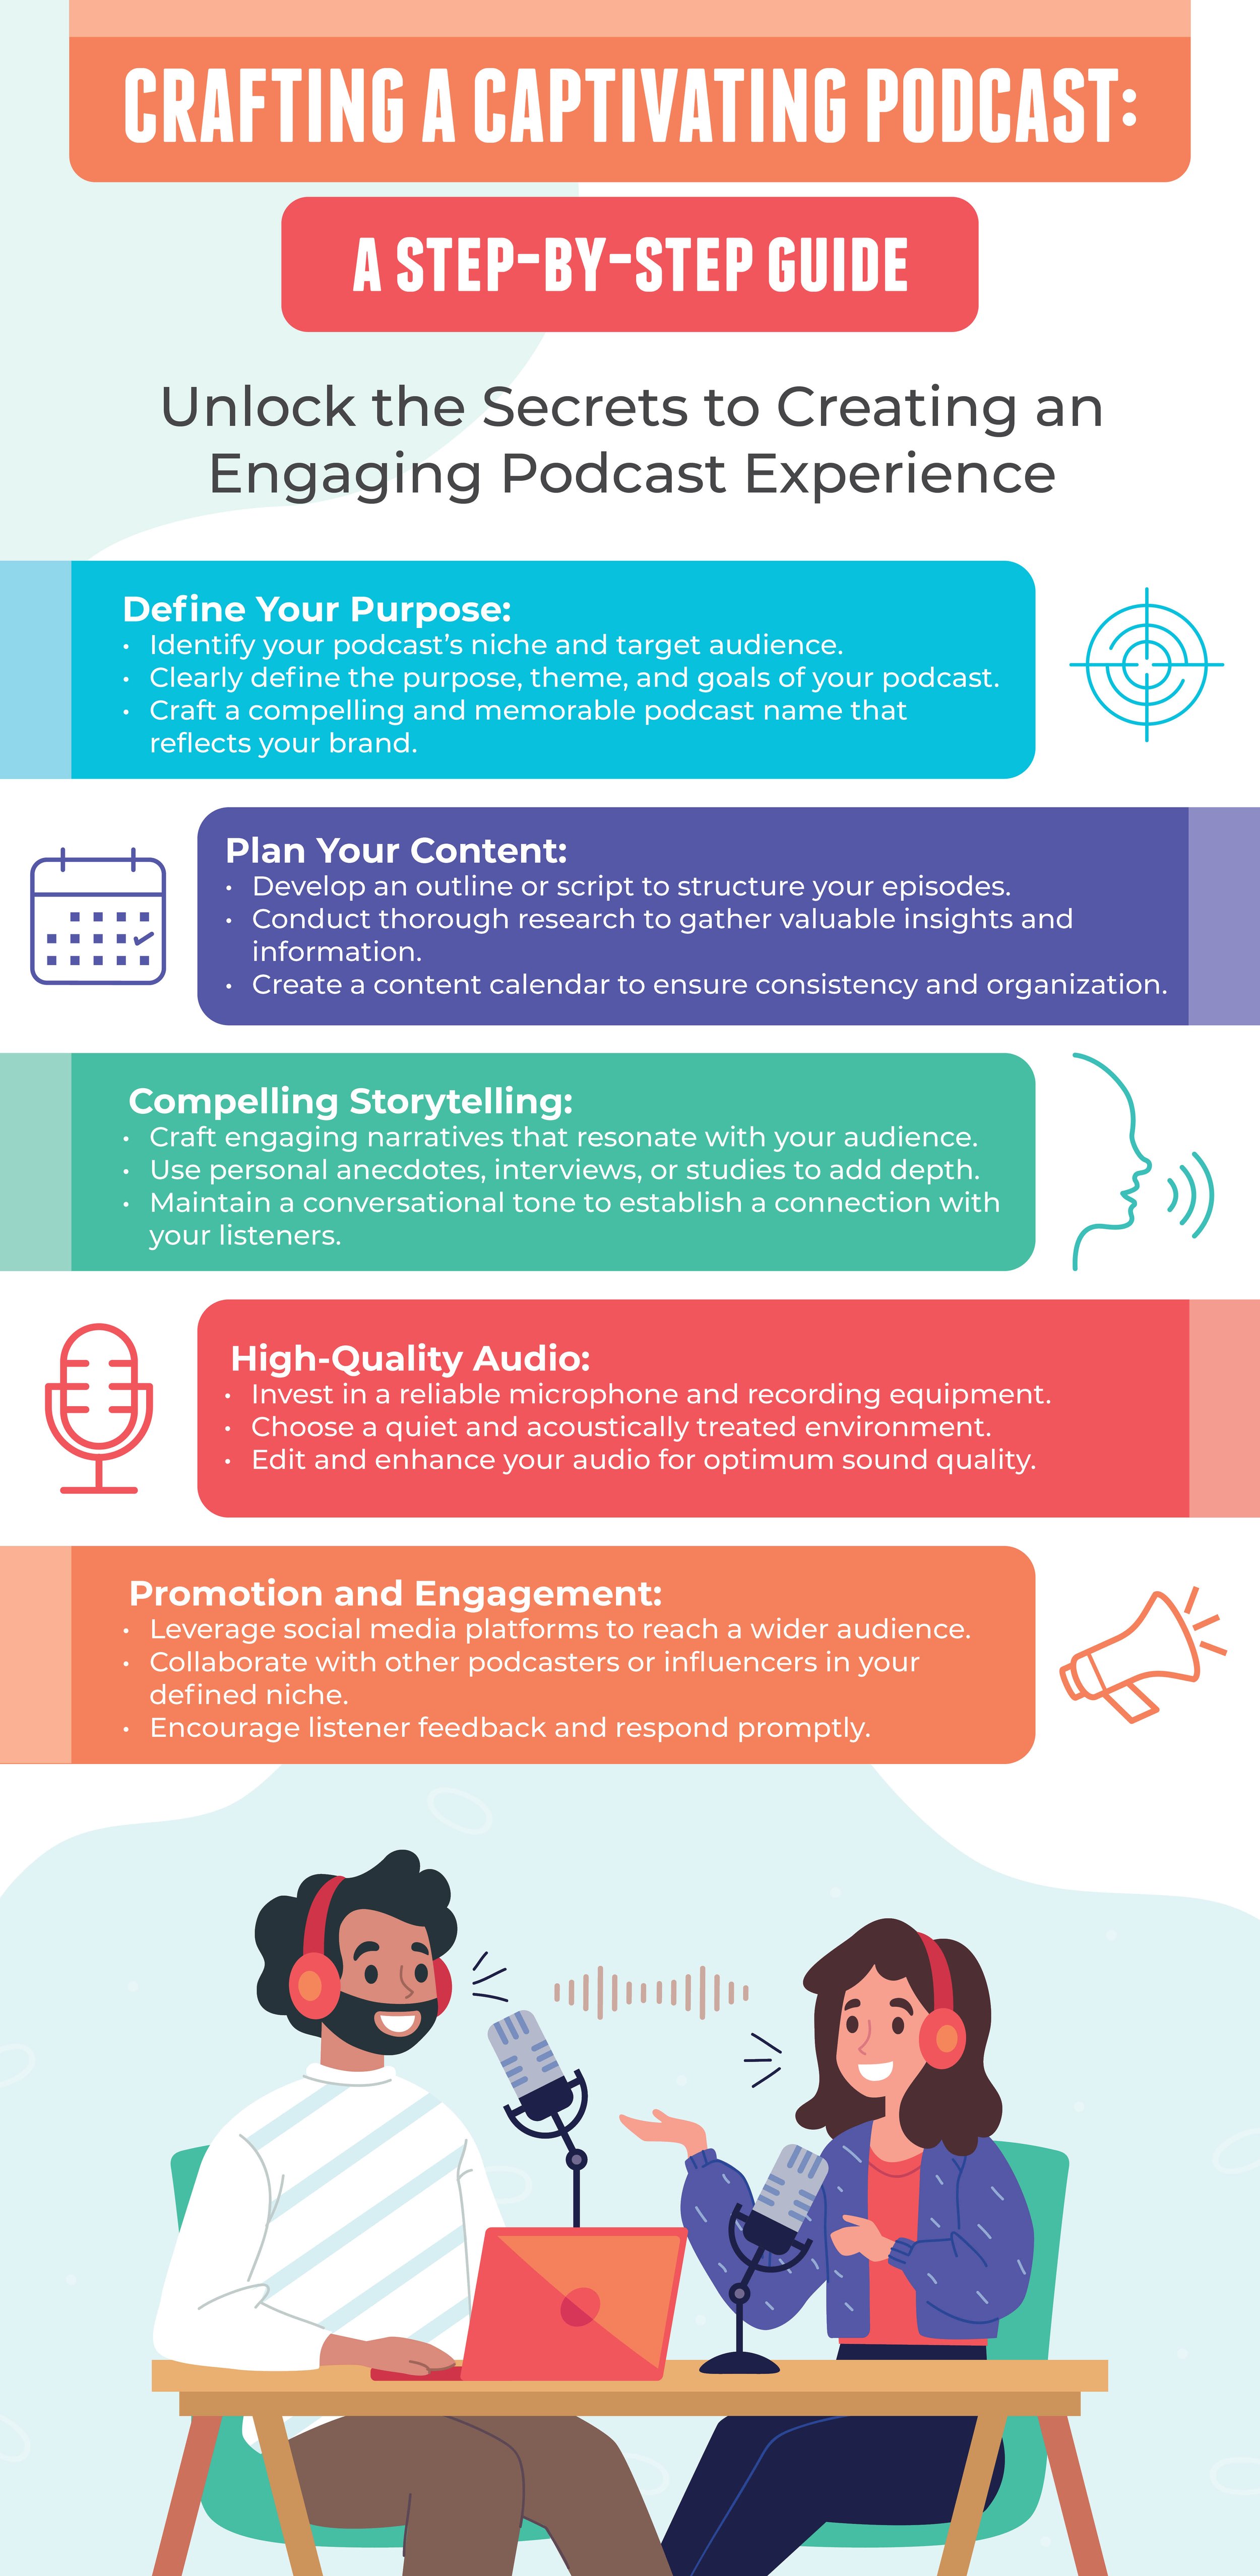 Infographic - Crafting a Captivating Podcast.jpg